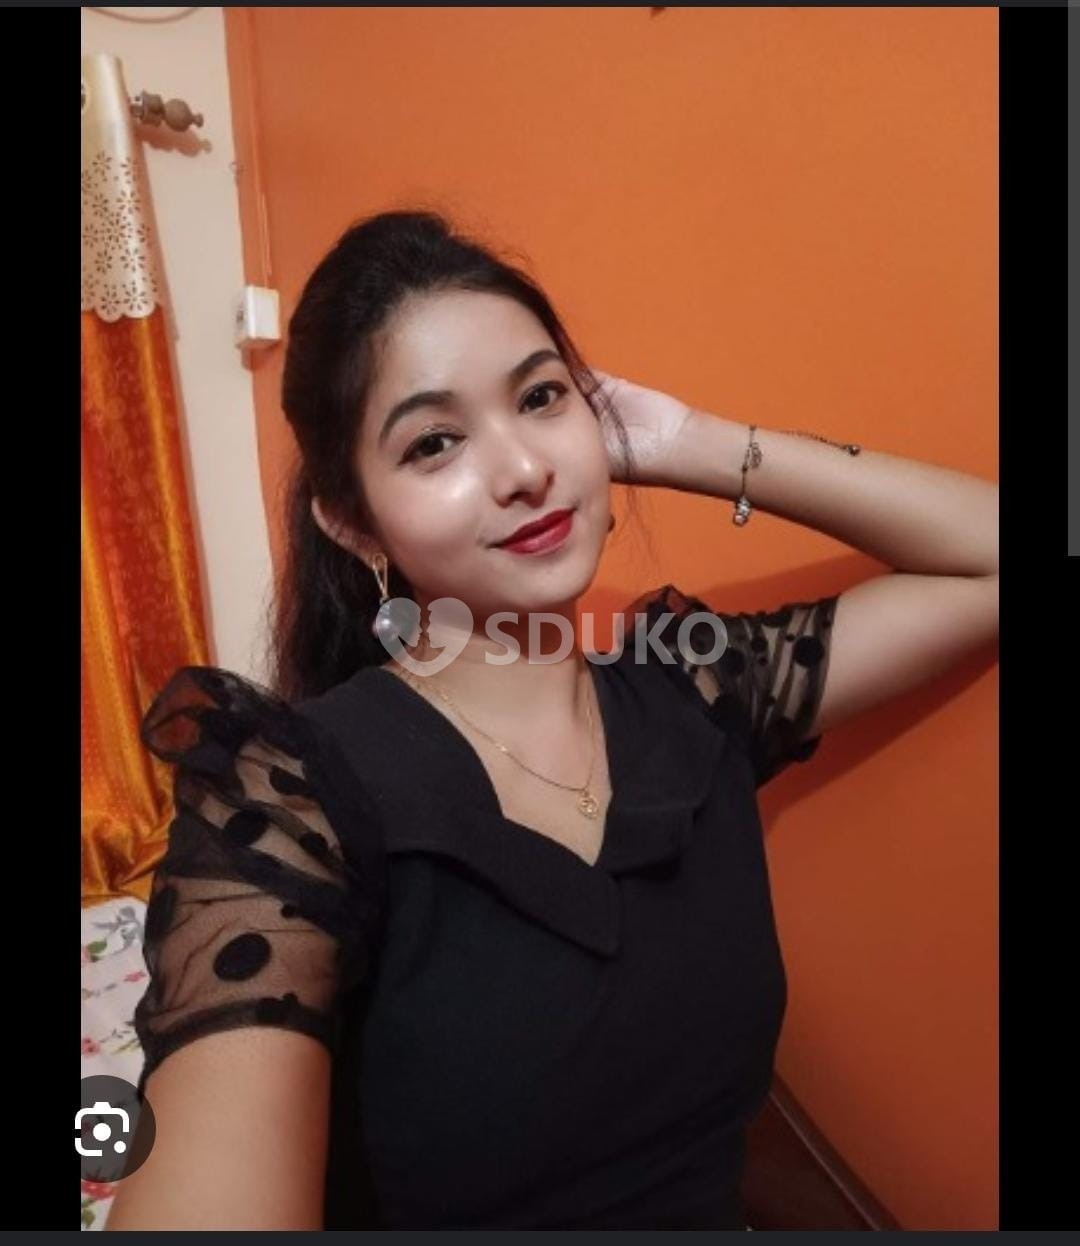 ANANNYA KANCHIPURAM CALL GIRLS SPA BODY-2-BODY MASSAGE OUTCALL INCALL AFFORDABLE PRICE 24 HOURS SERVICE WHATSAPP 95710-8